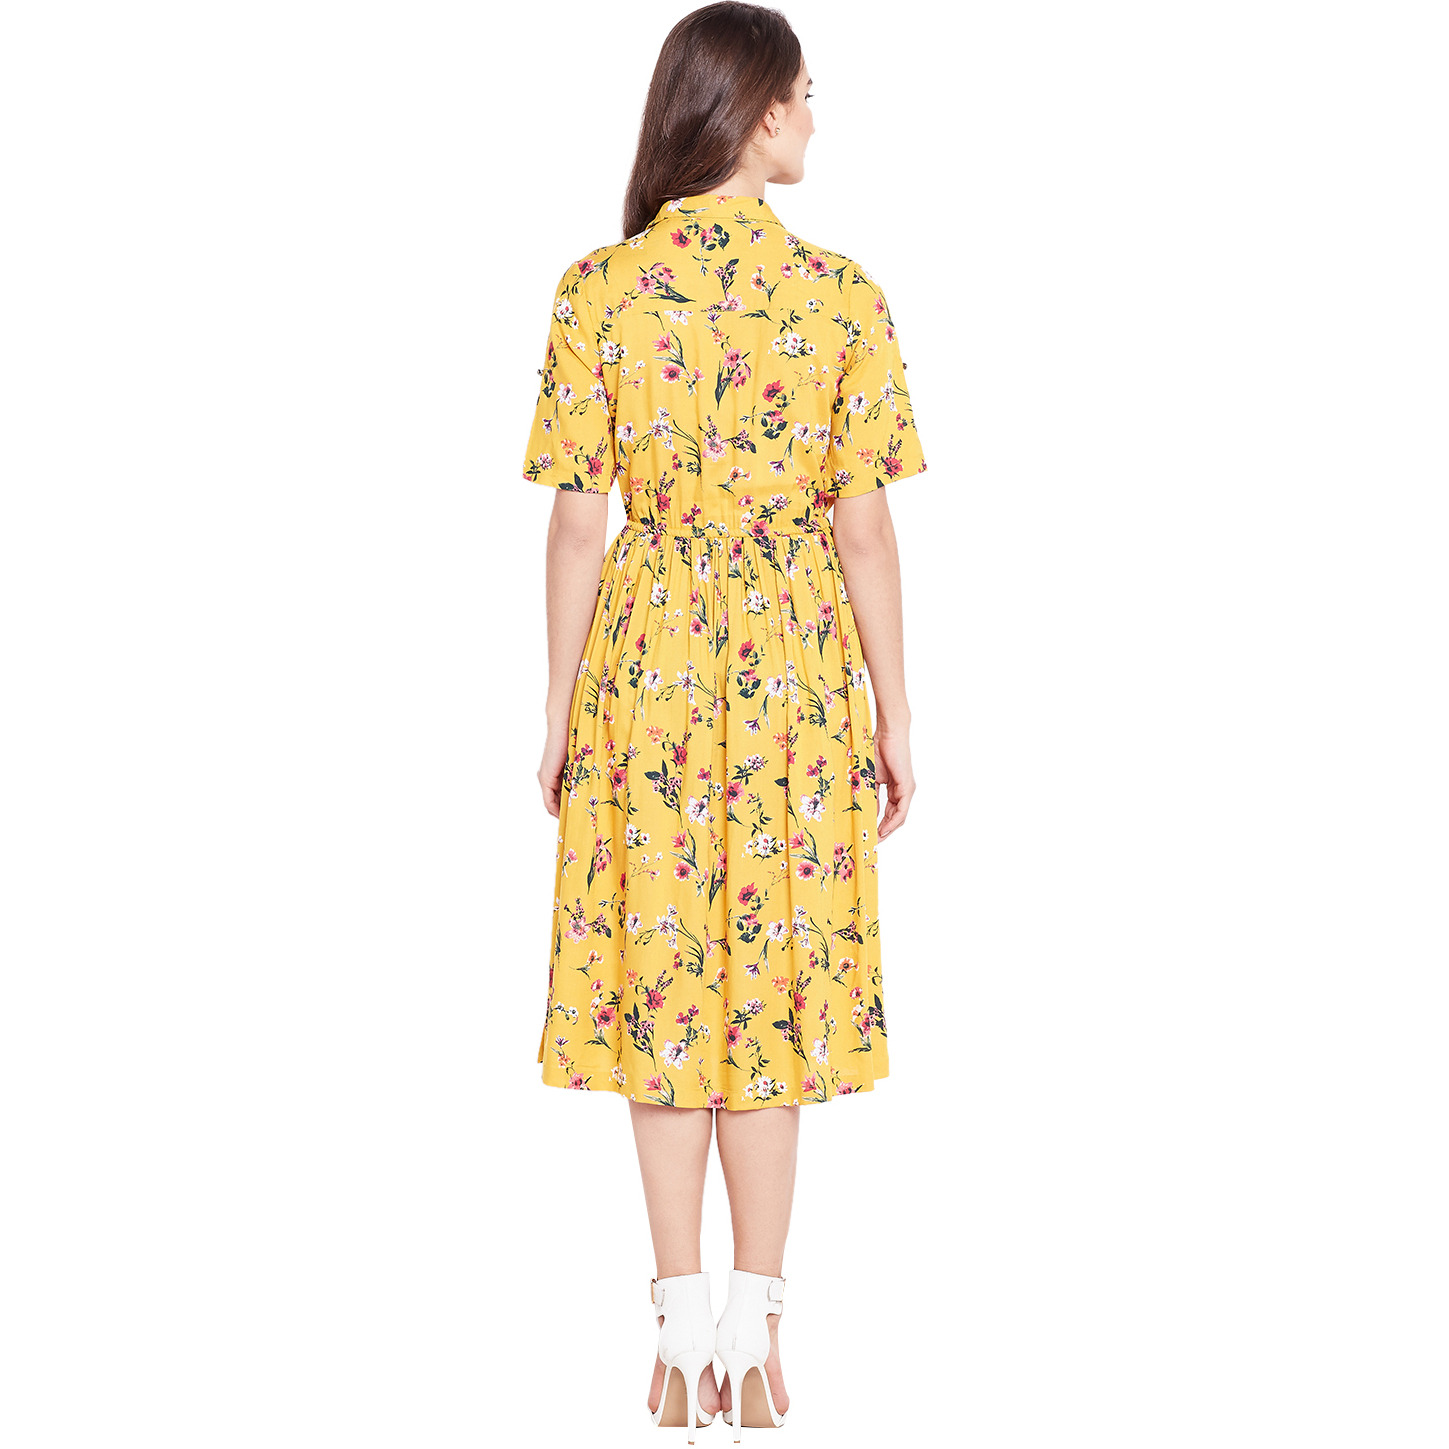 Purplicious Mustard Yellow Floral Fit and Flare Dress